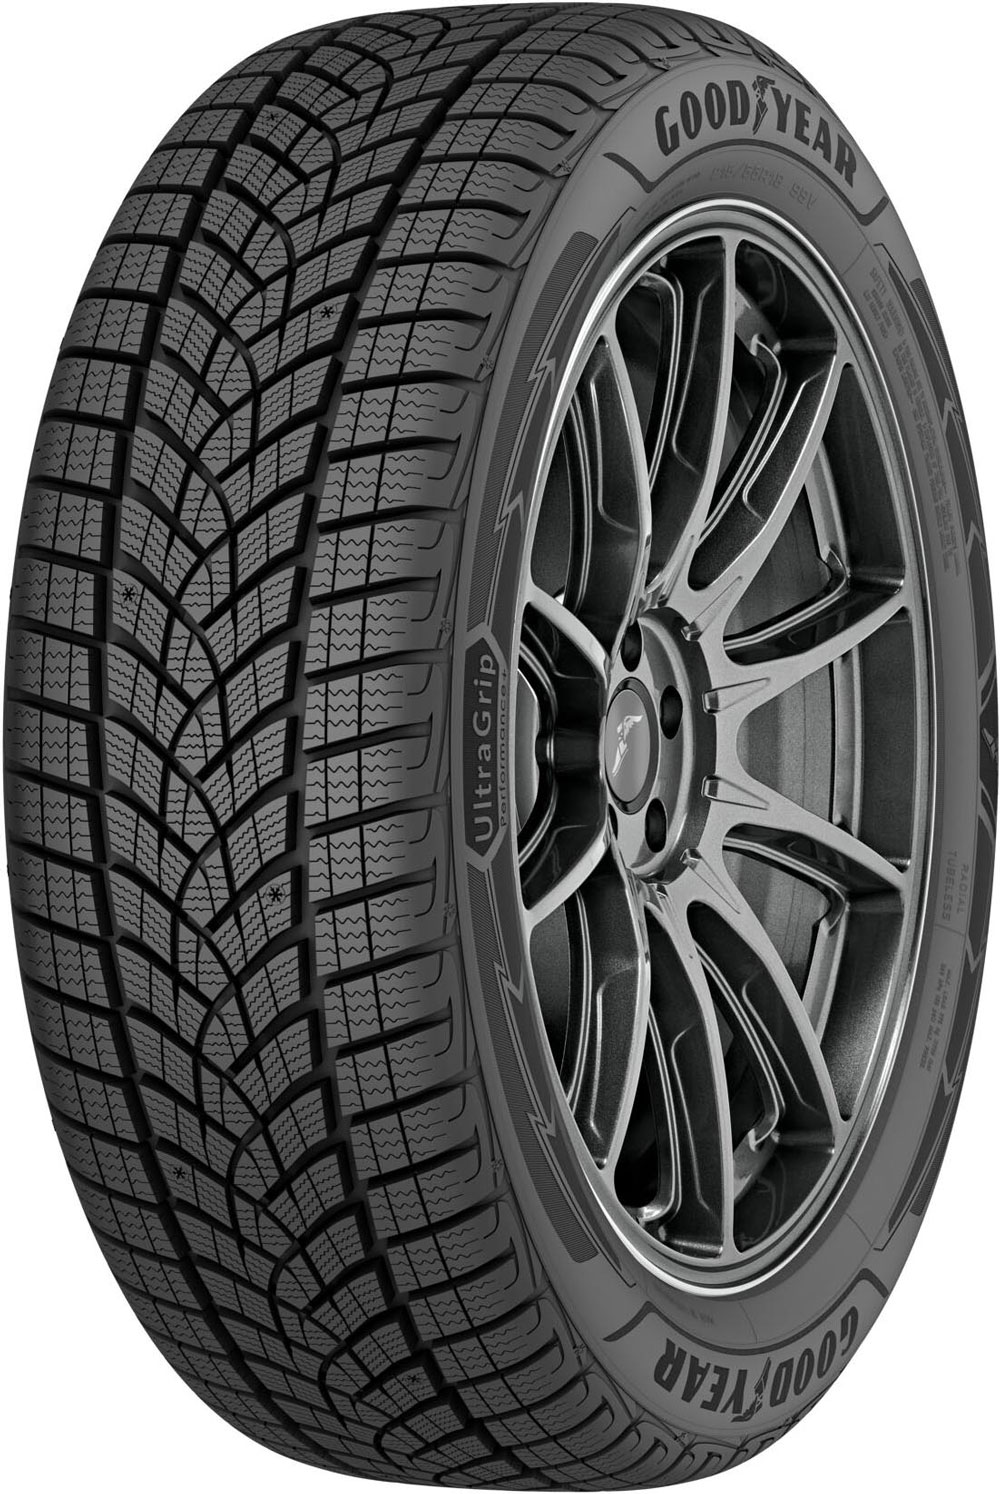 Anvelope jeep GOODYEAR UG PERF + SUV XL 215/70 R16 104H